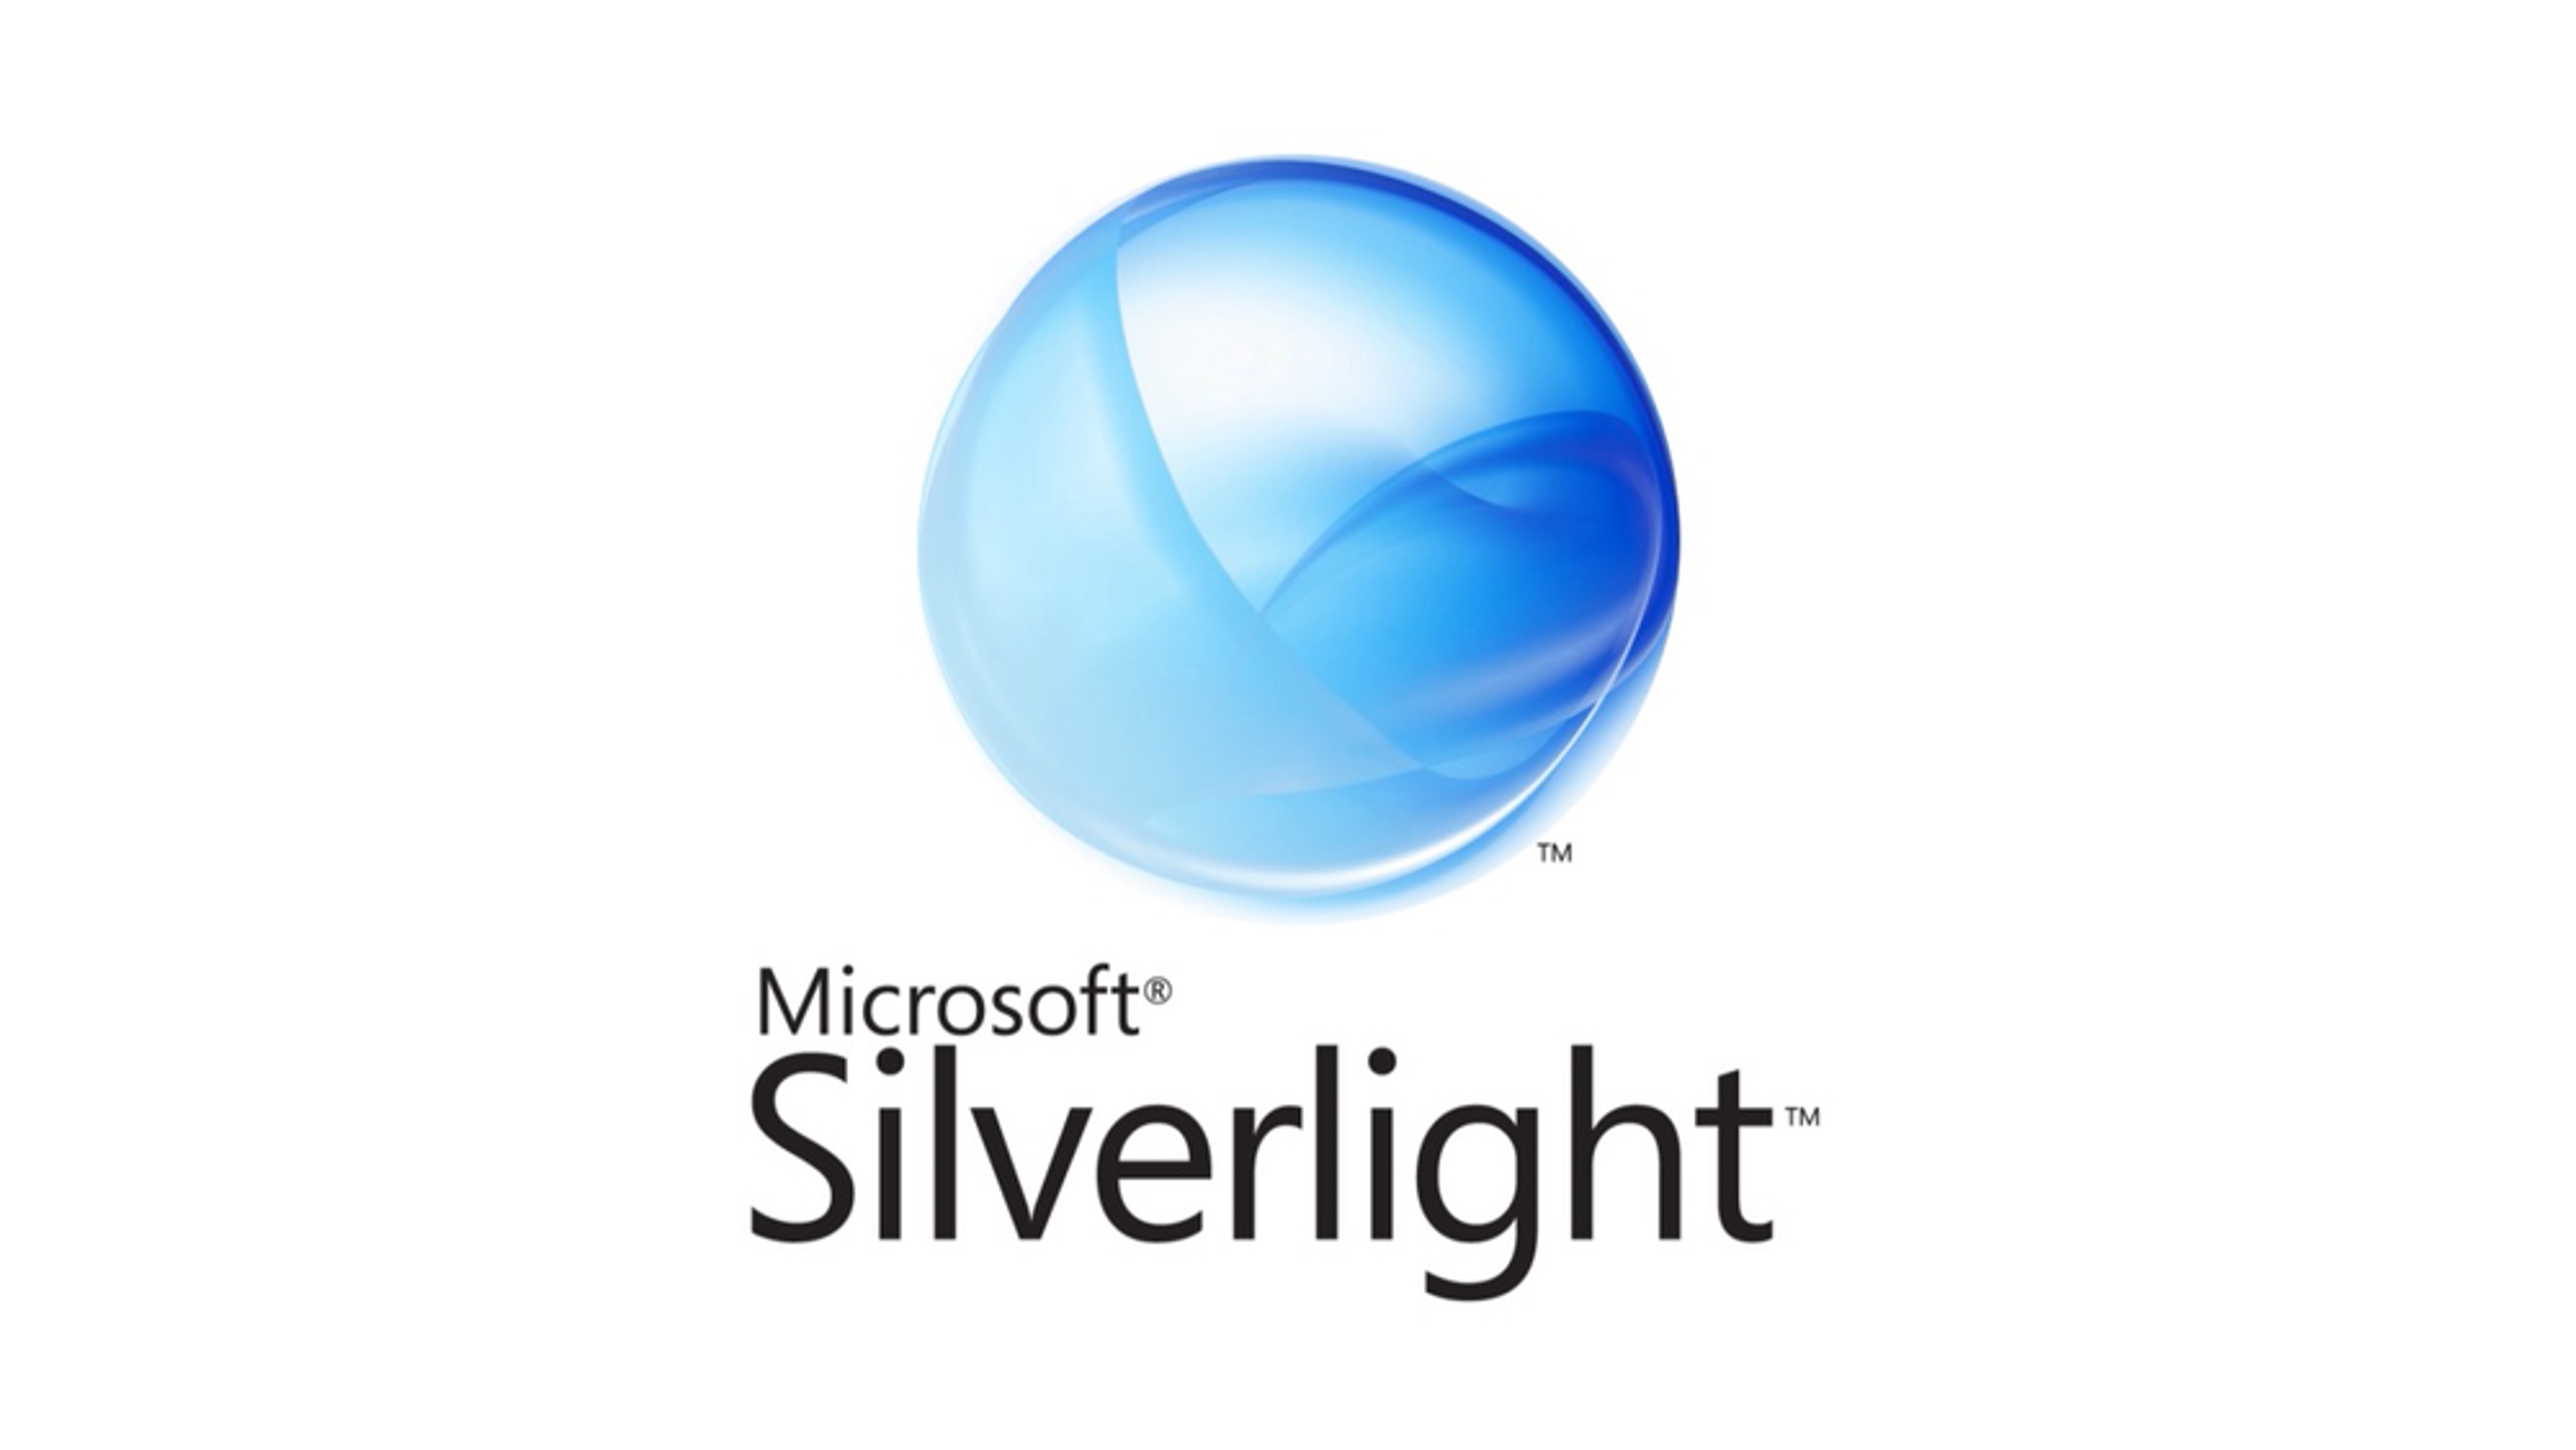 What Is Microsoft Silverlight In Chrome